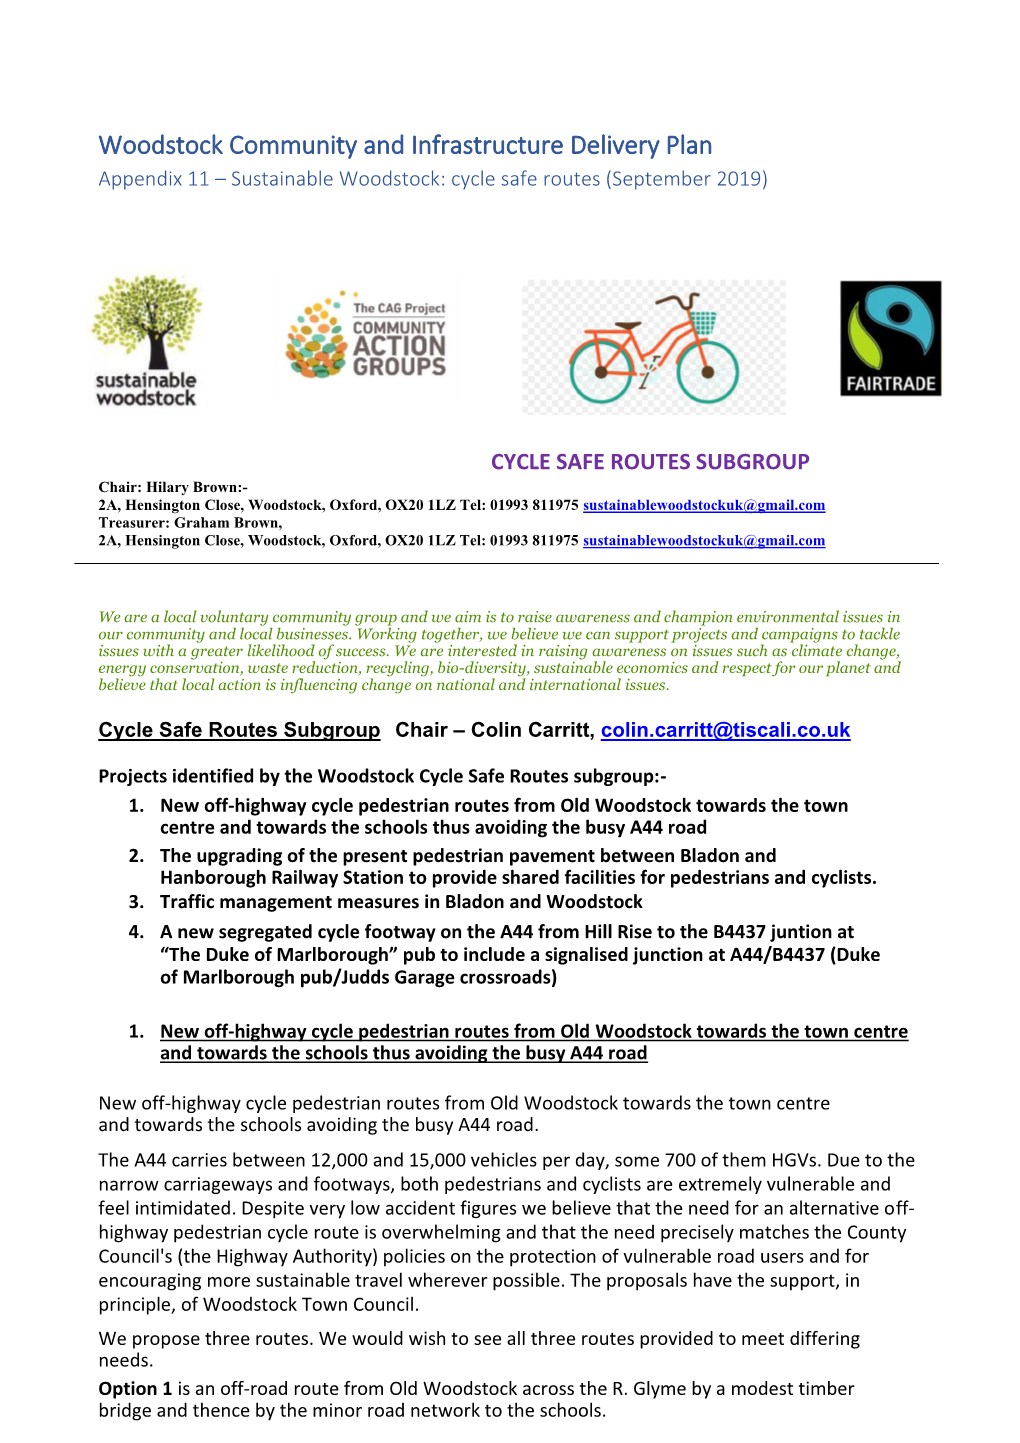 Cycle Safe Routes (September 2019)